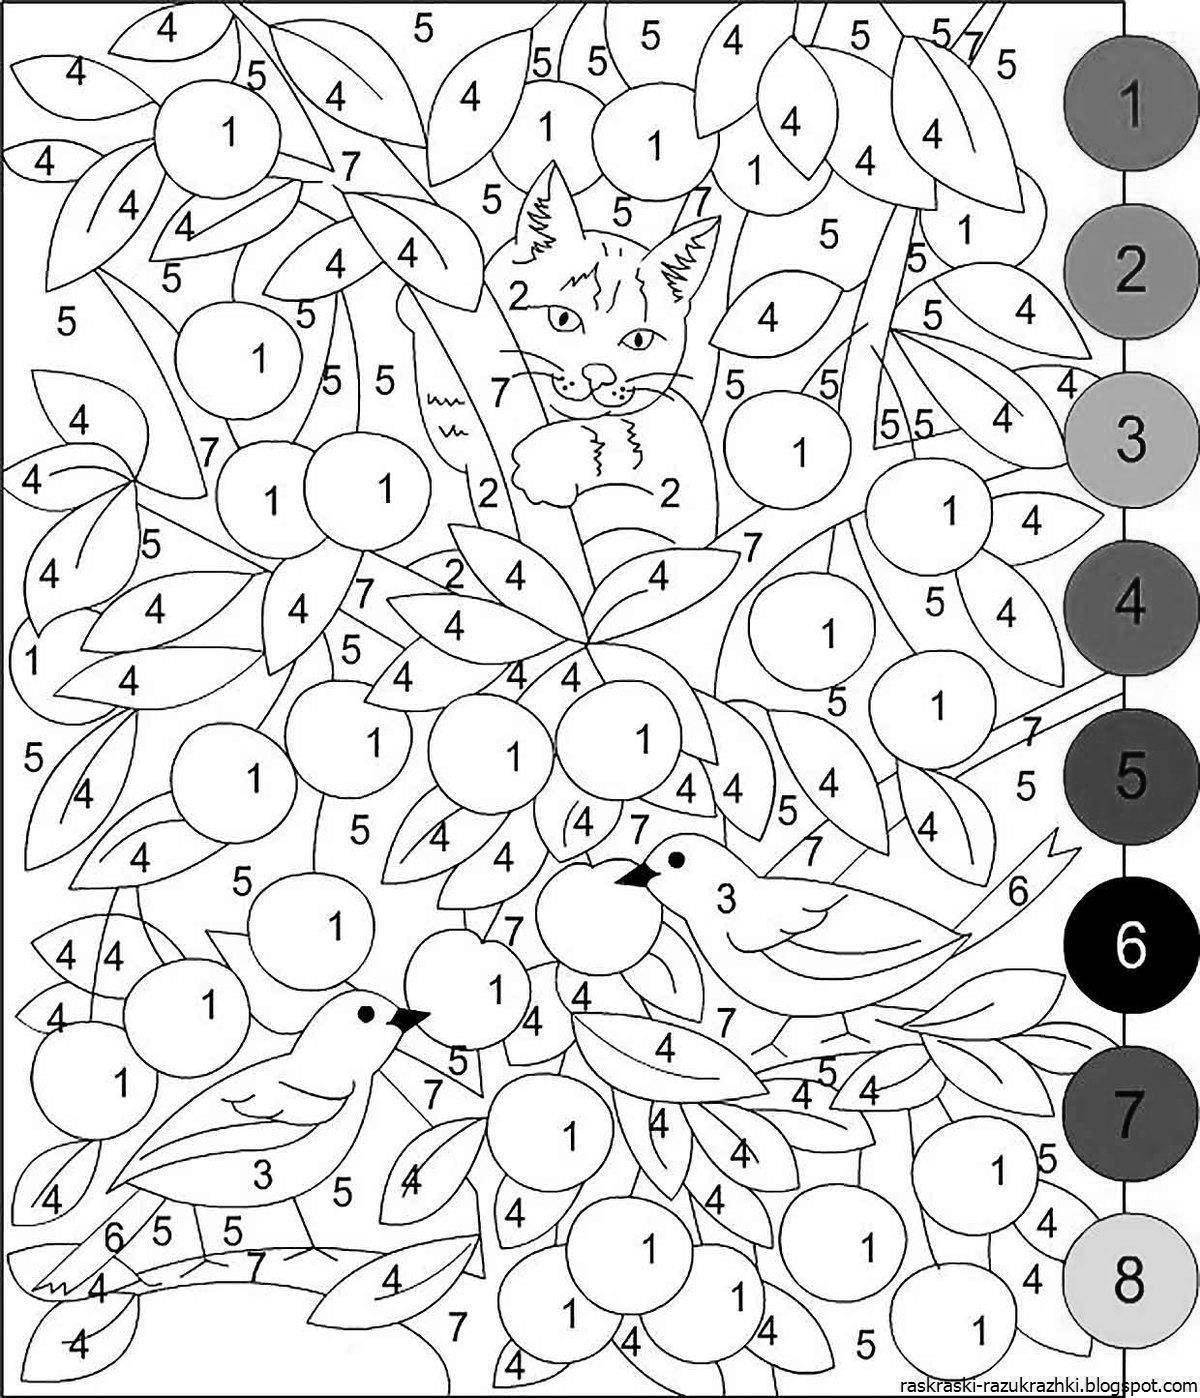 Stimulating coloring by numbers offline